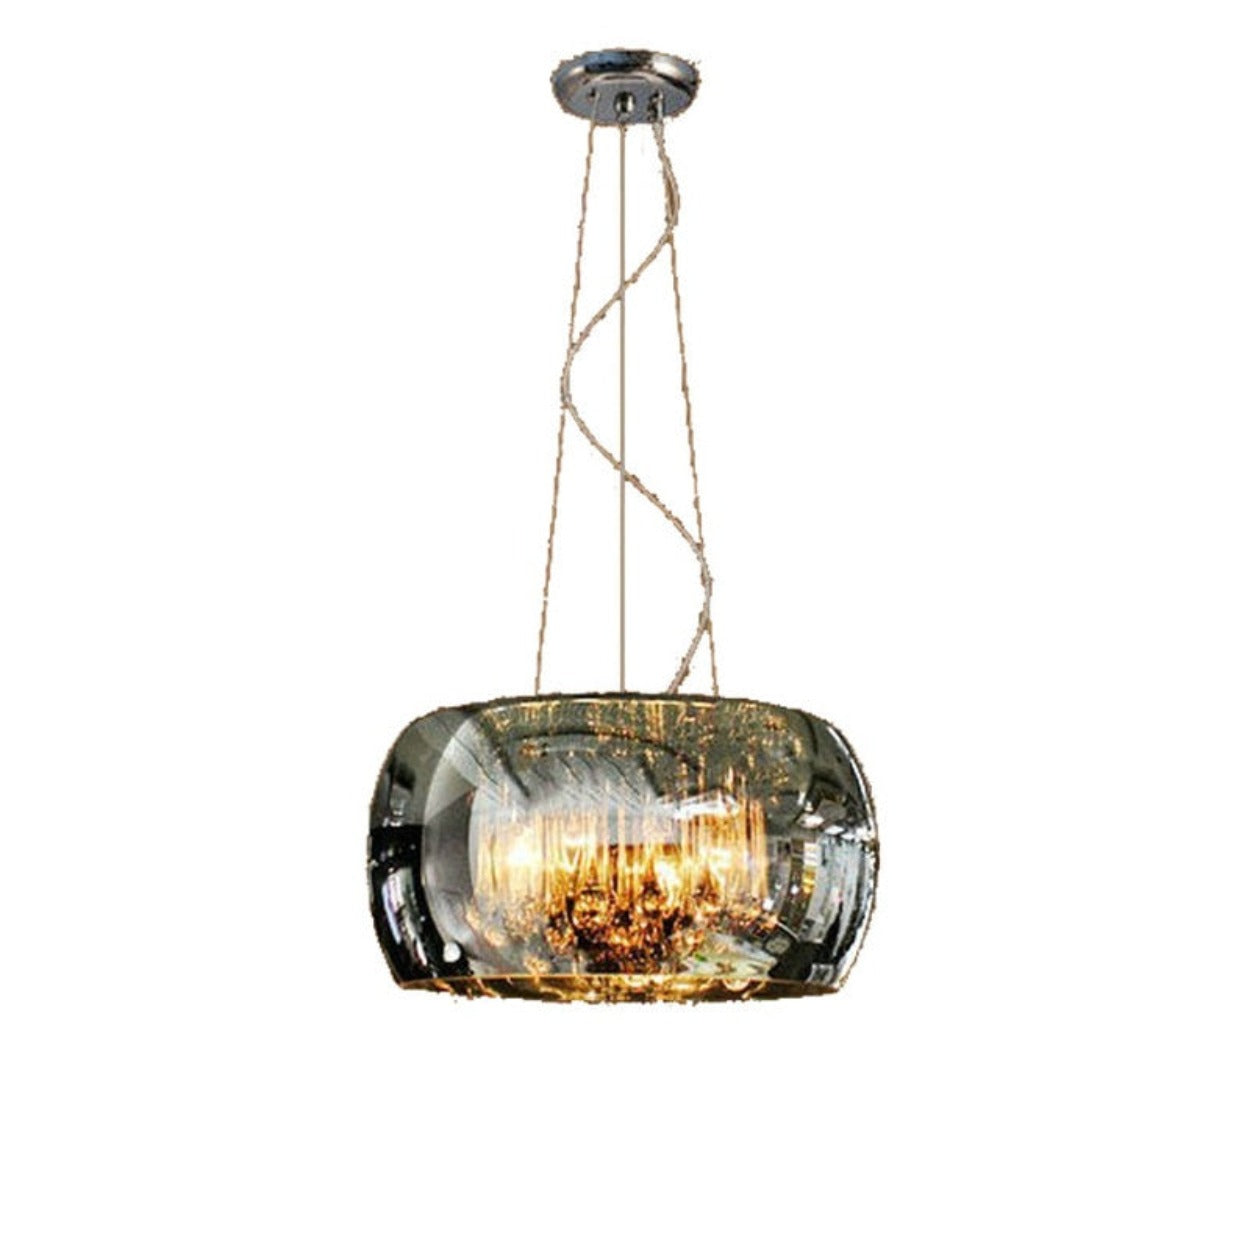 ANKUR DOMA PEARL GLASS DOME AND CRYSTAL LED HANGING CHANDELIER